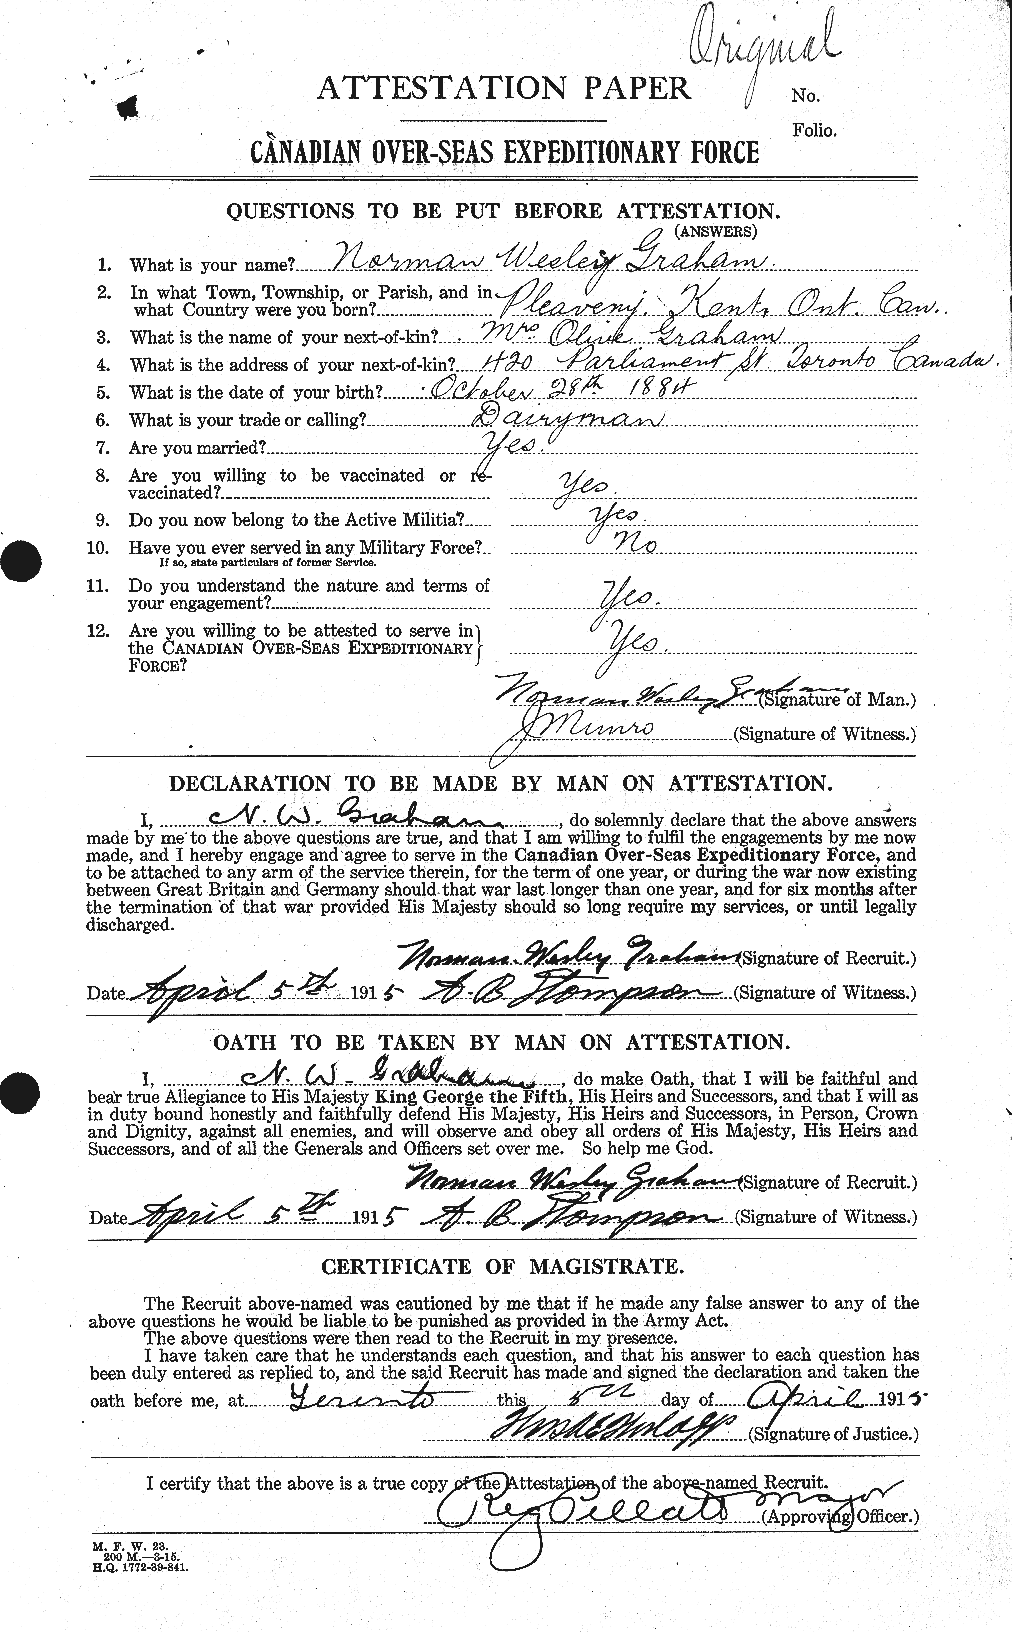 Personnel Records of the First World War - CEF 359327a